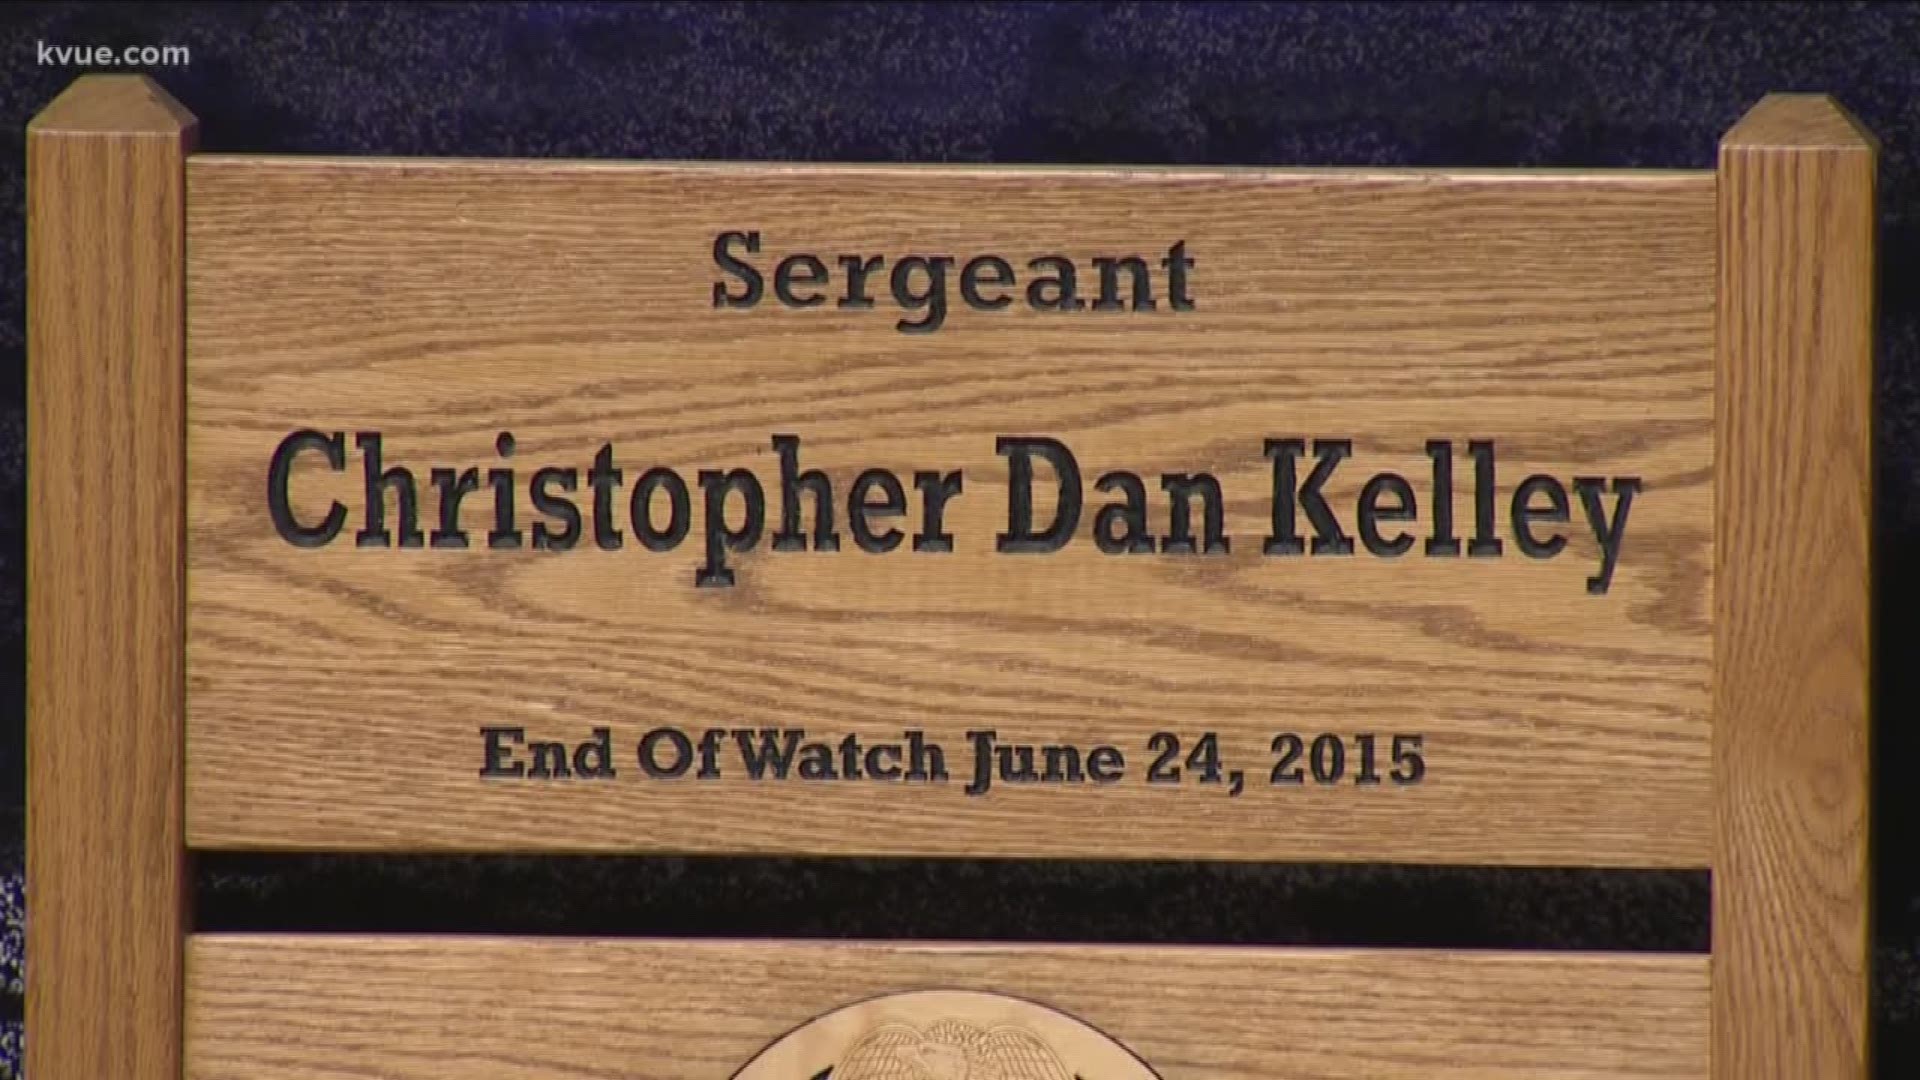 A part of Highway 79 is being renamed for a Hutto police officer who died in the line of duty.